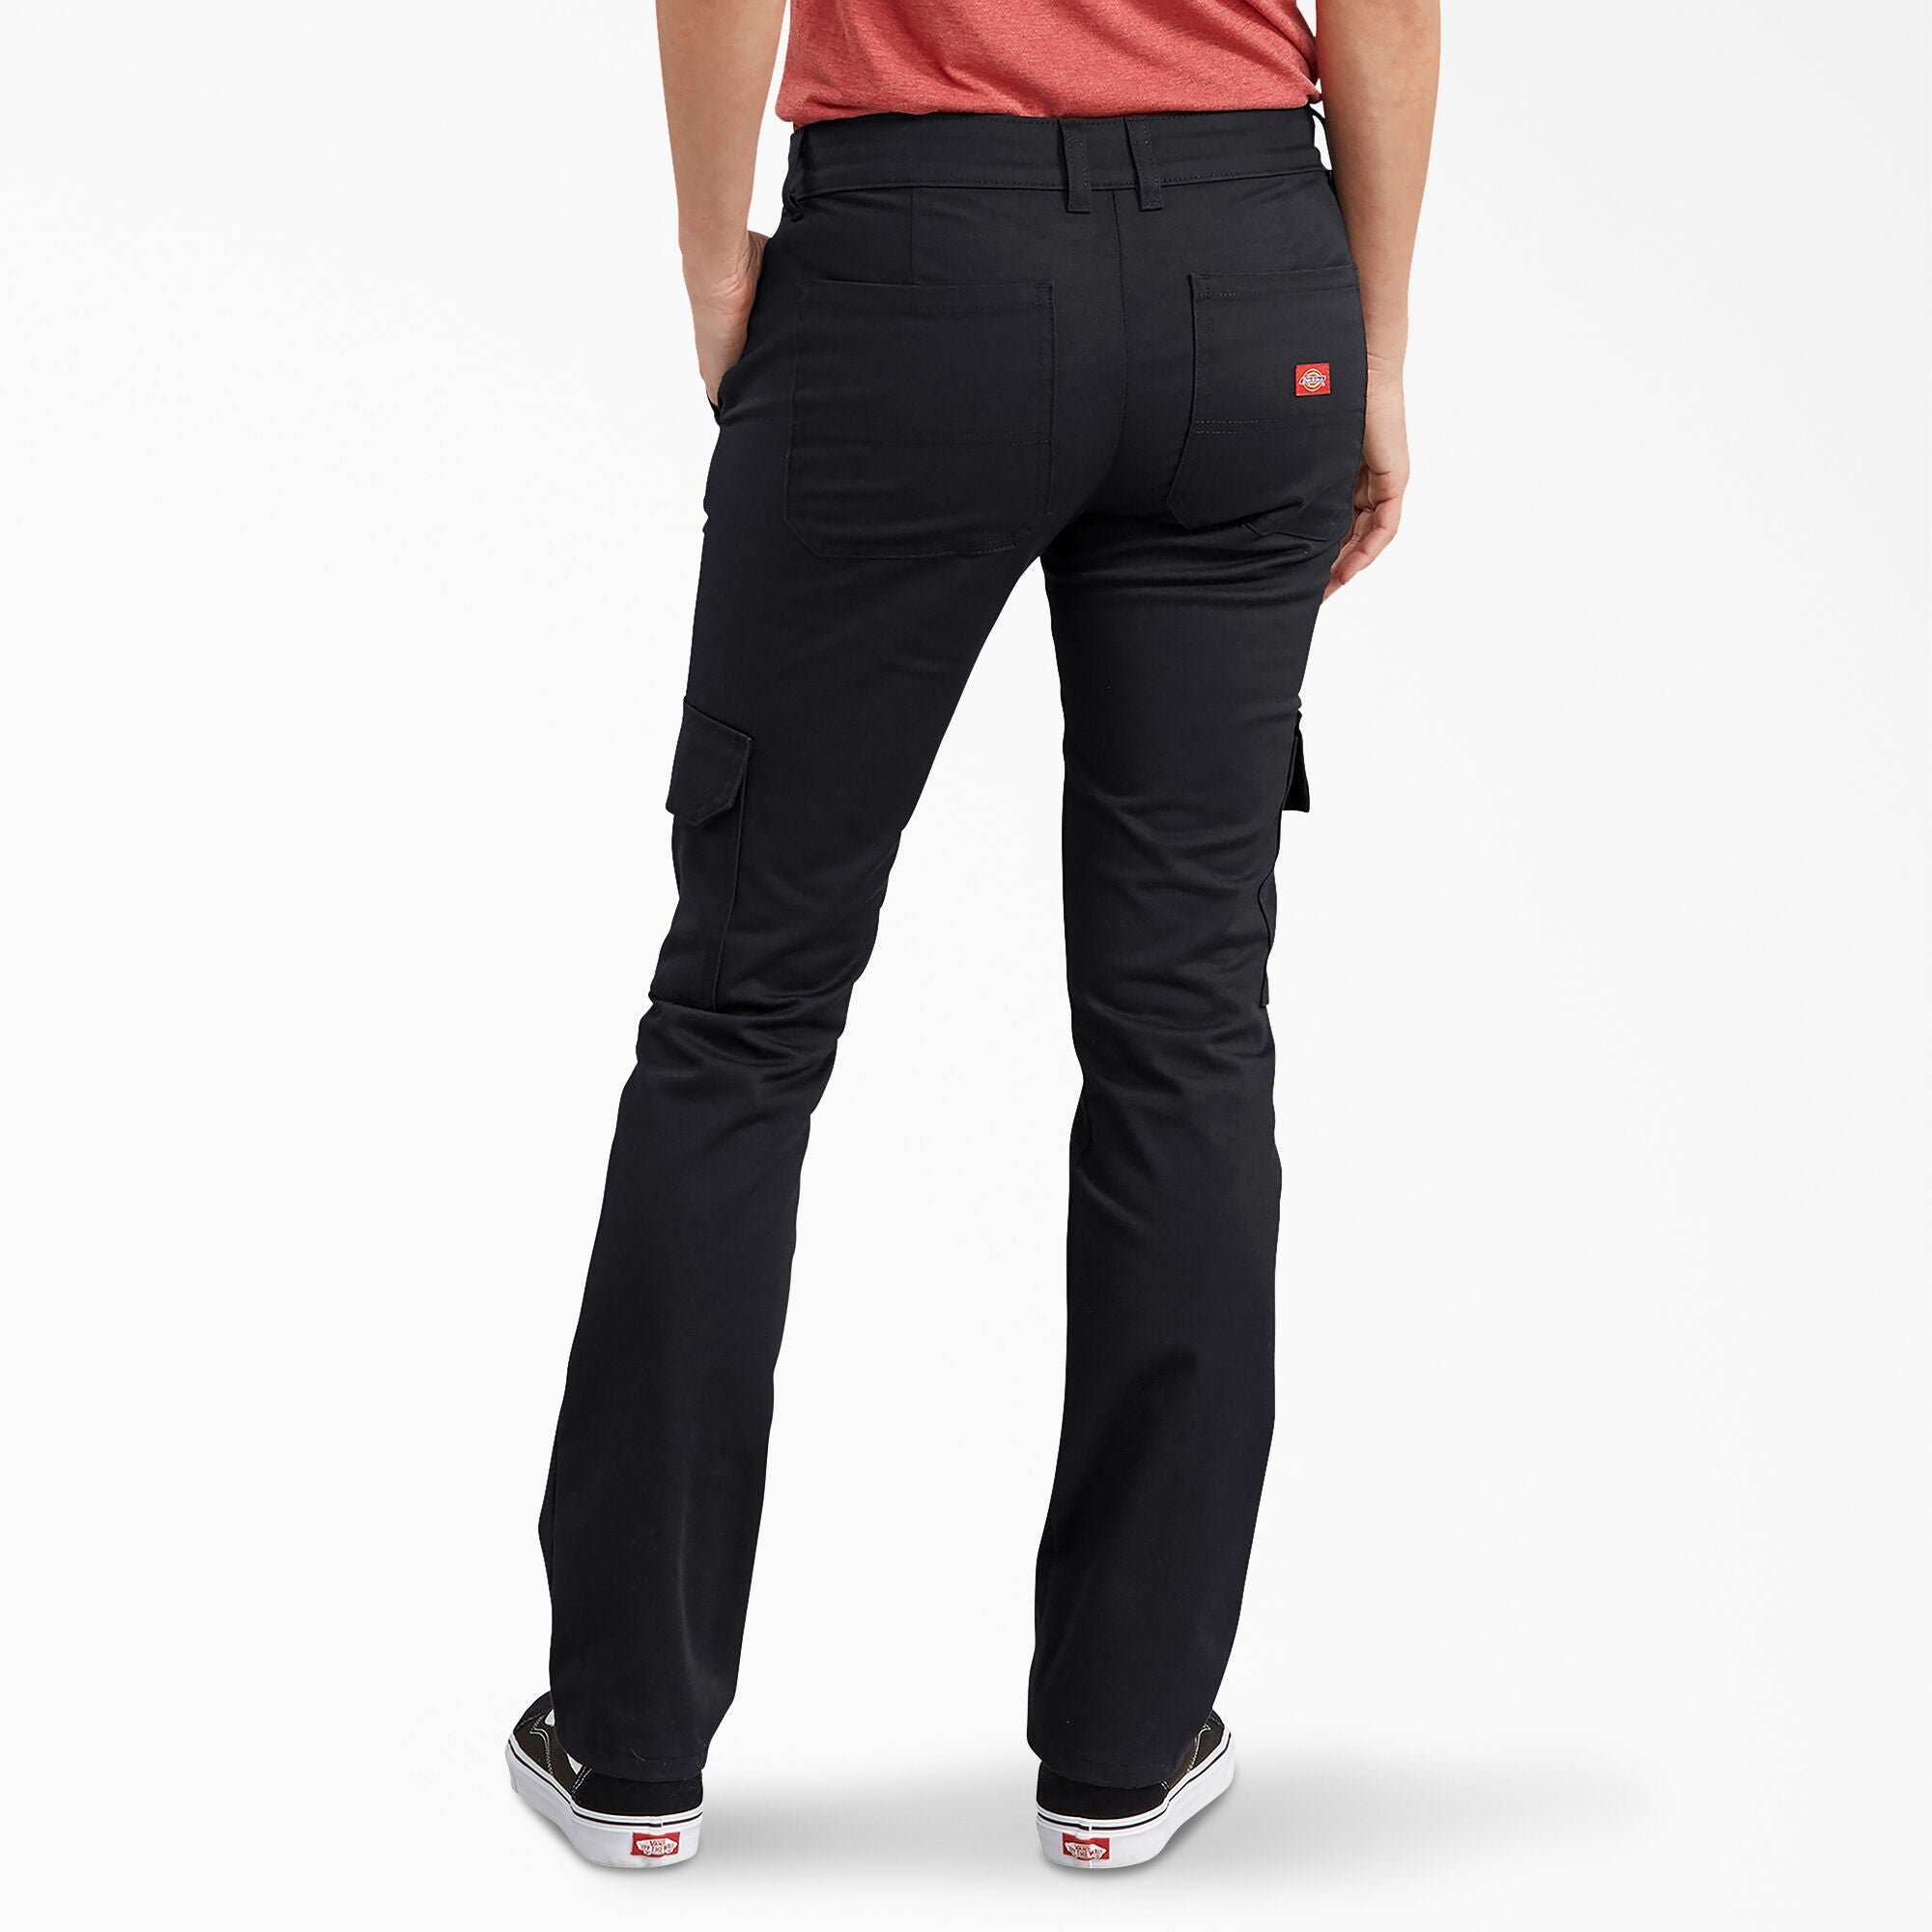 Dickies Women's Slim Fit Mid-Rise Stretch Duck Carpenter Pants at